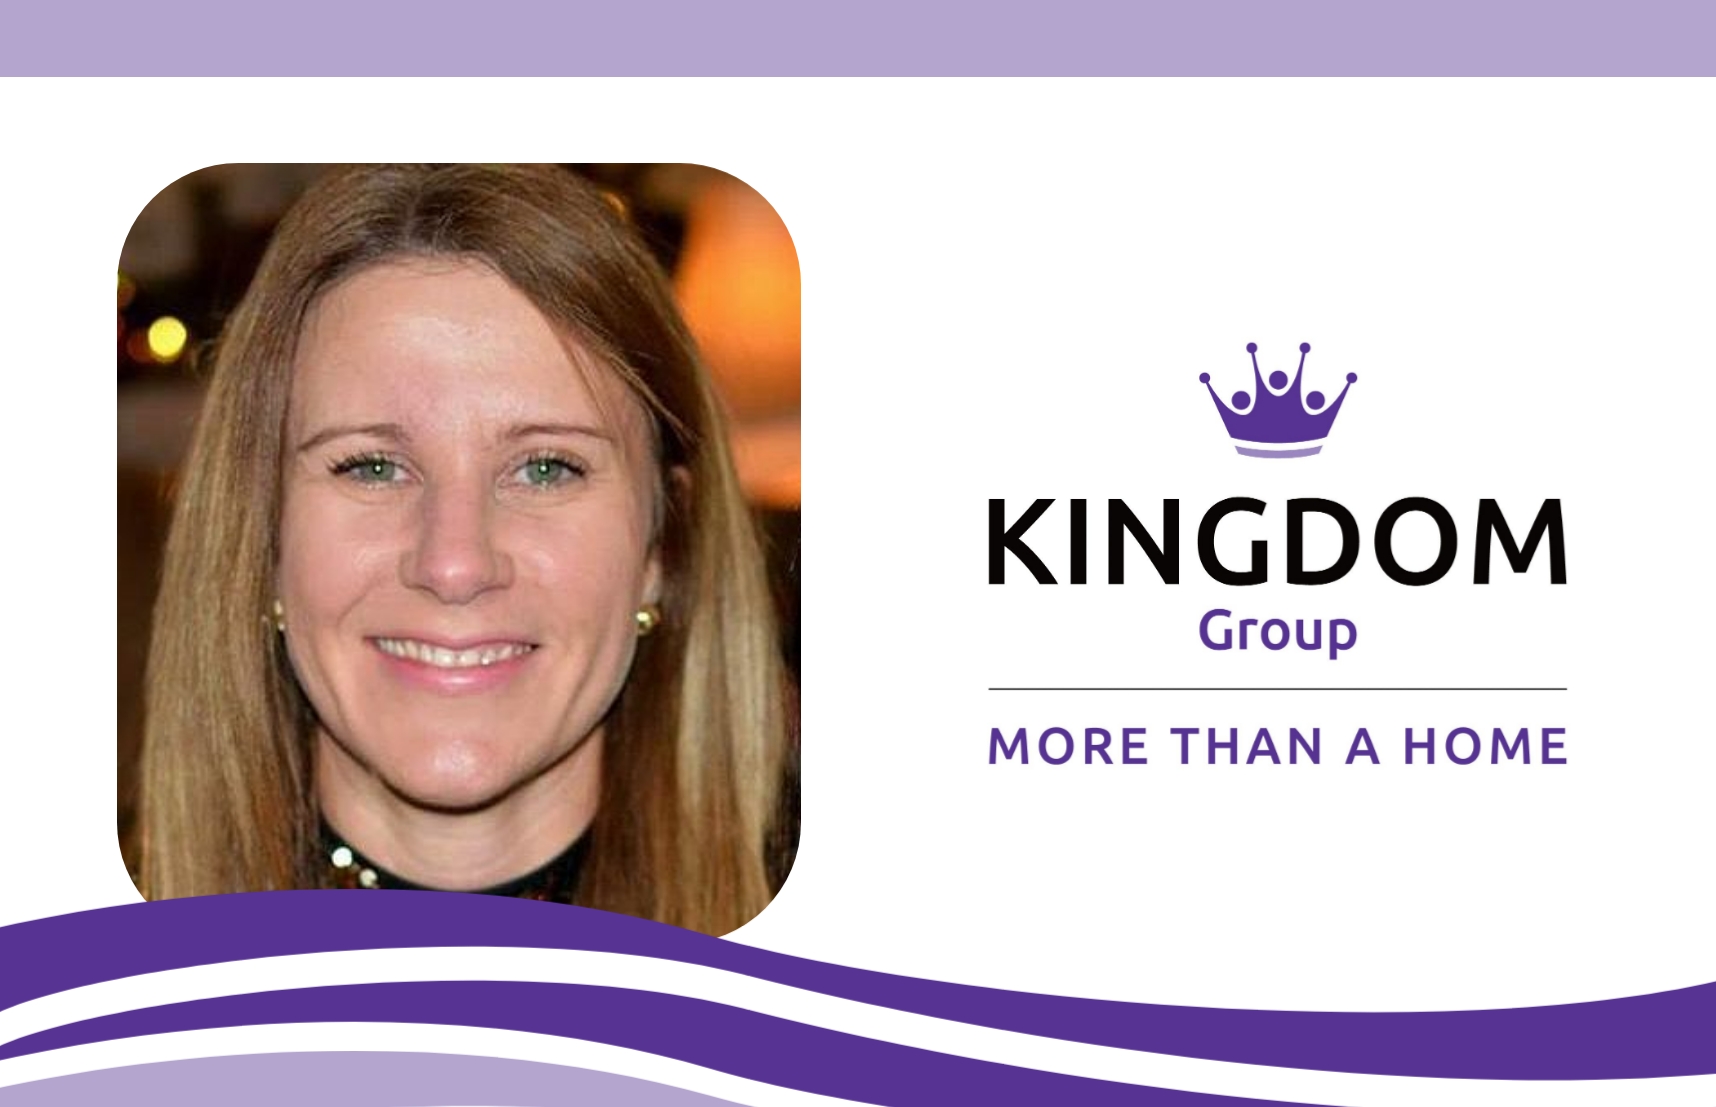 Tricia Hill appointed as development director at Kingdom Group